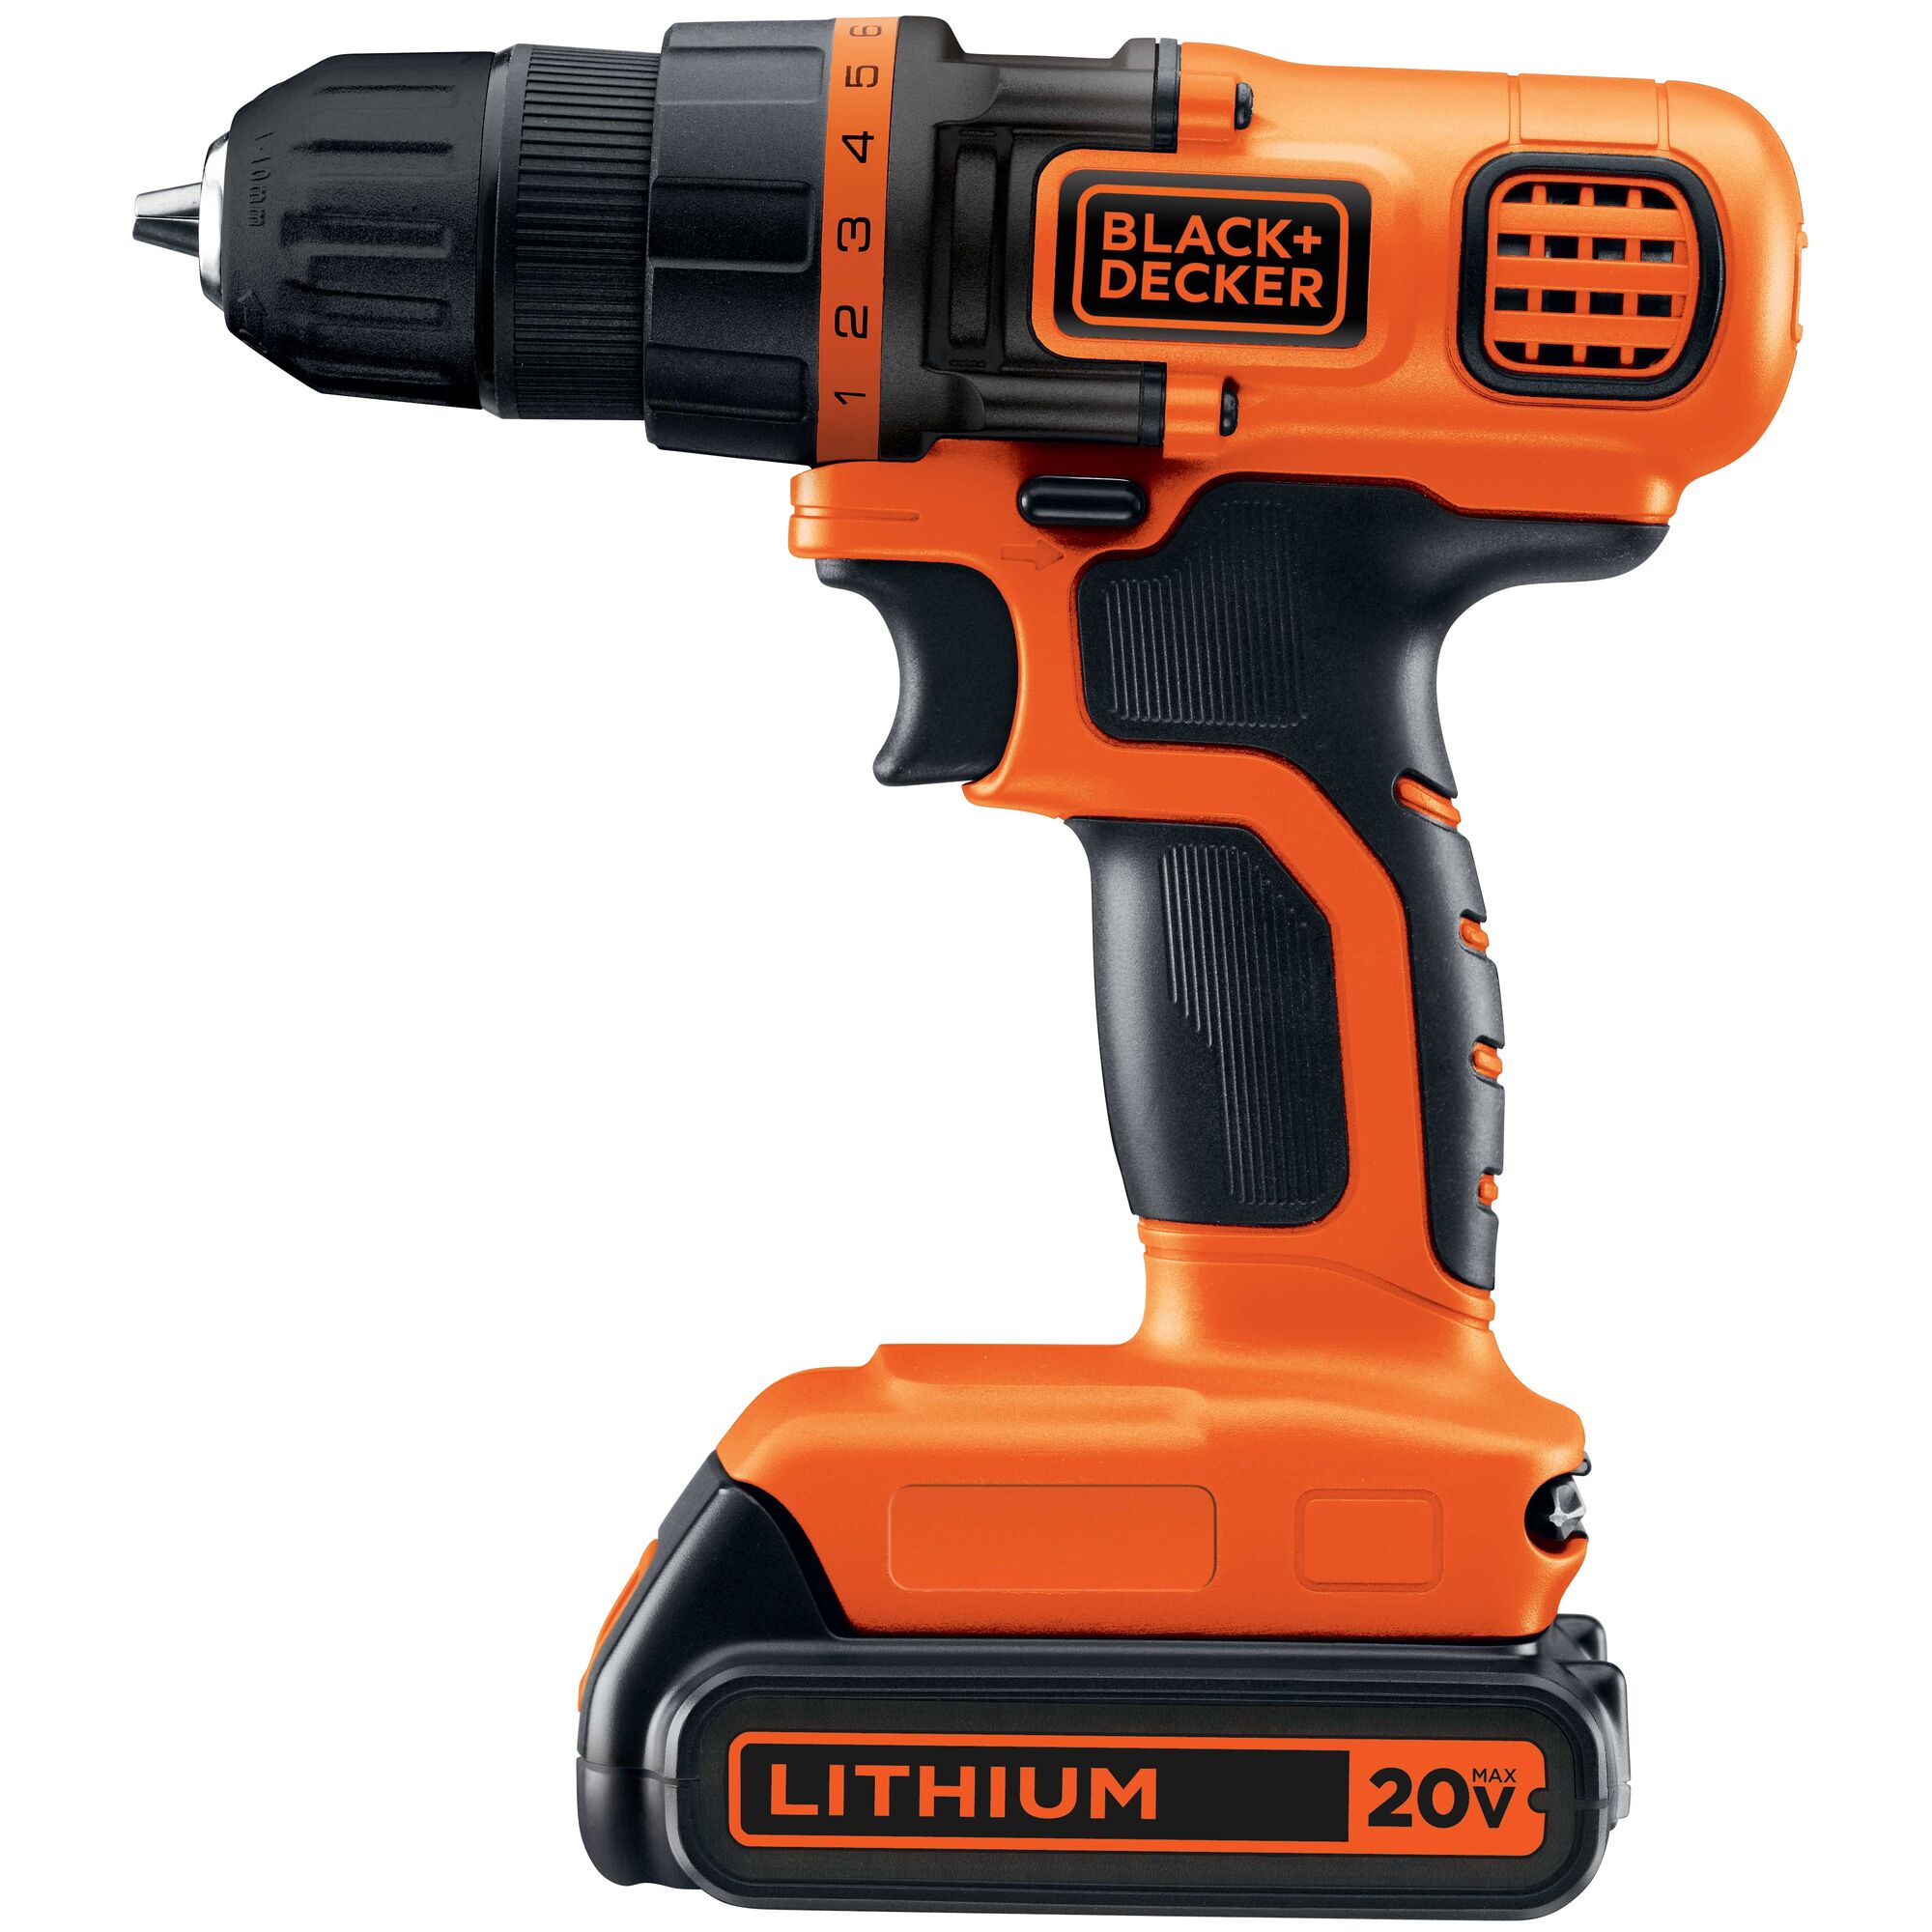 Profile of 20 volt cordless lithium drill or driver.